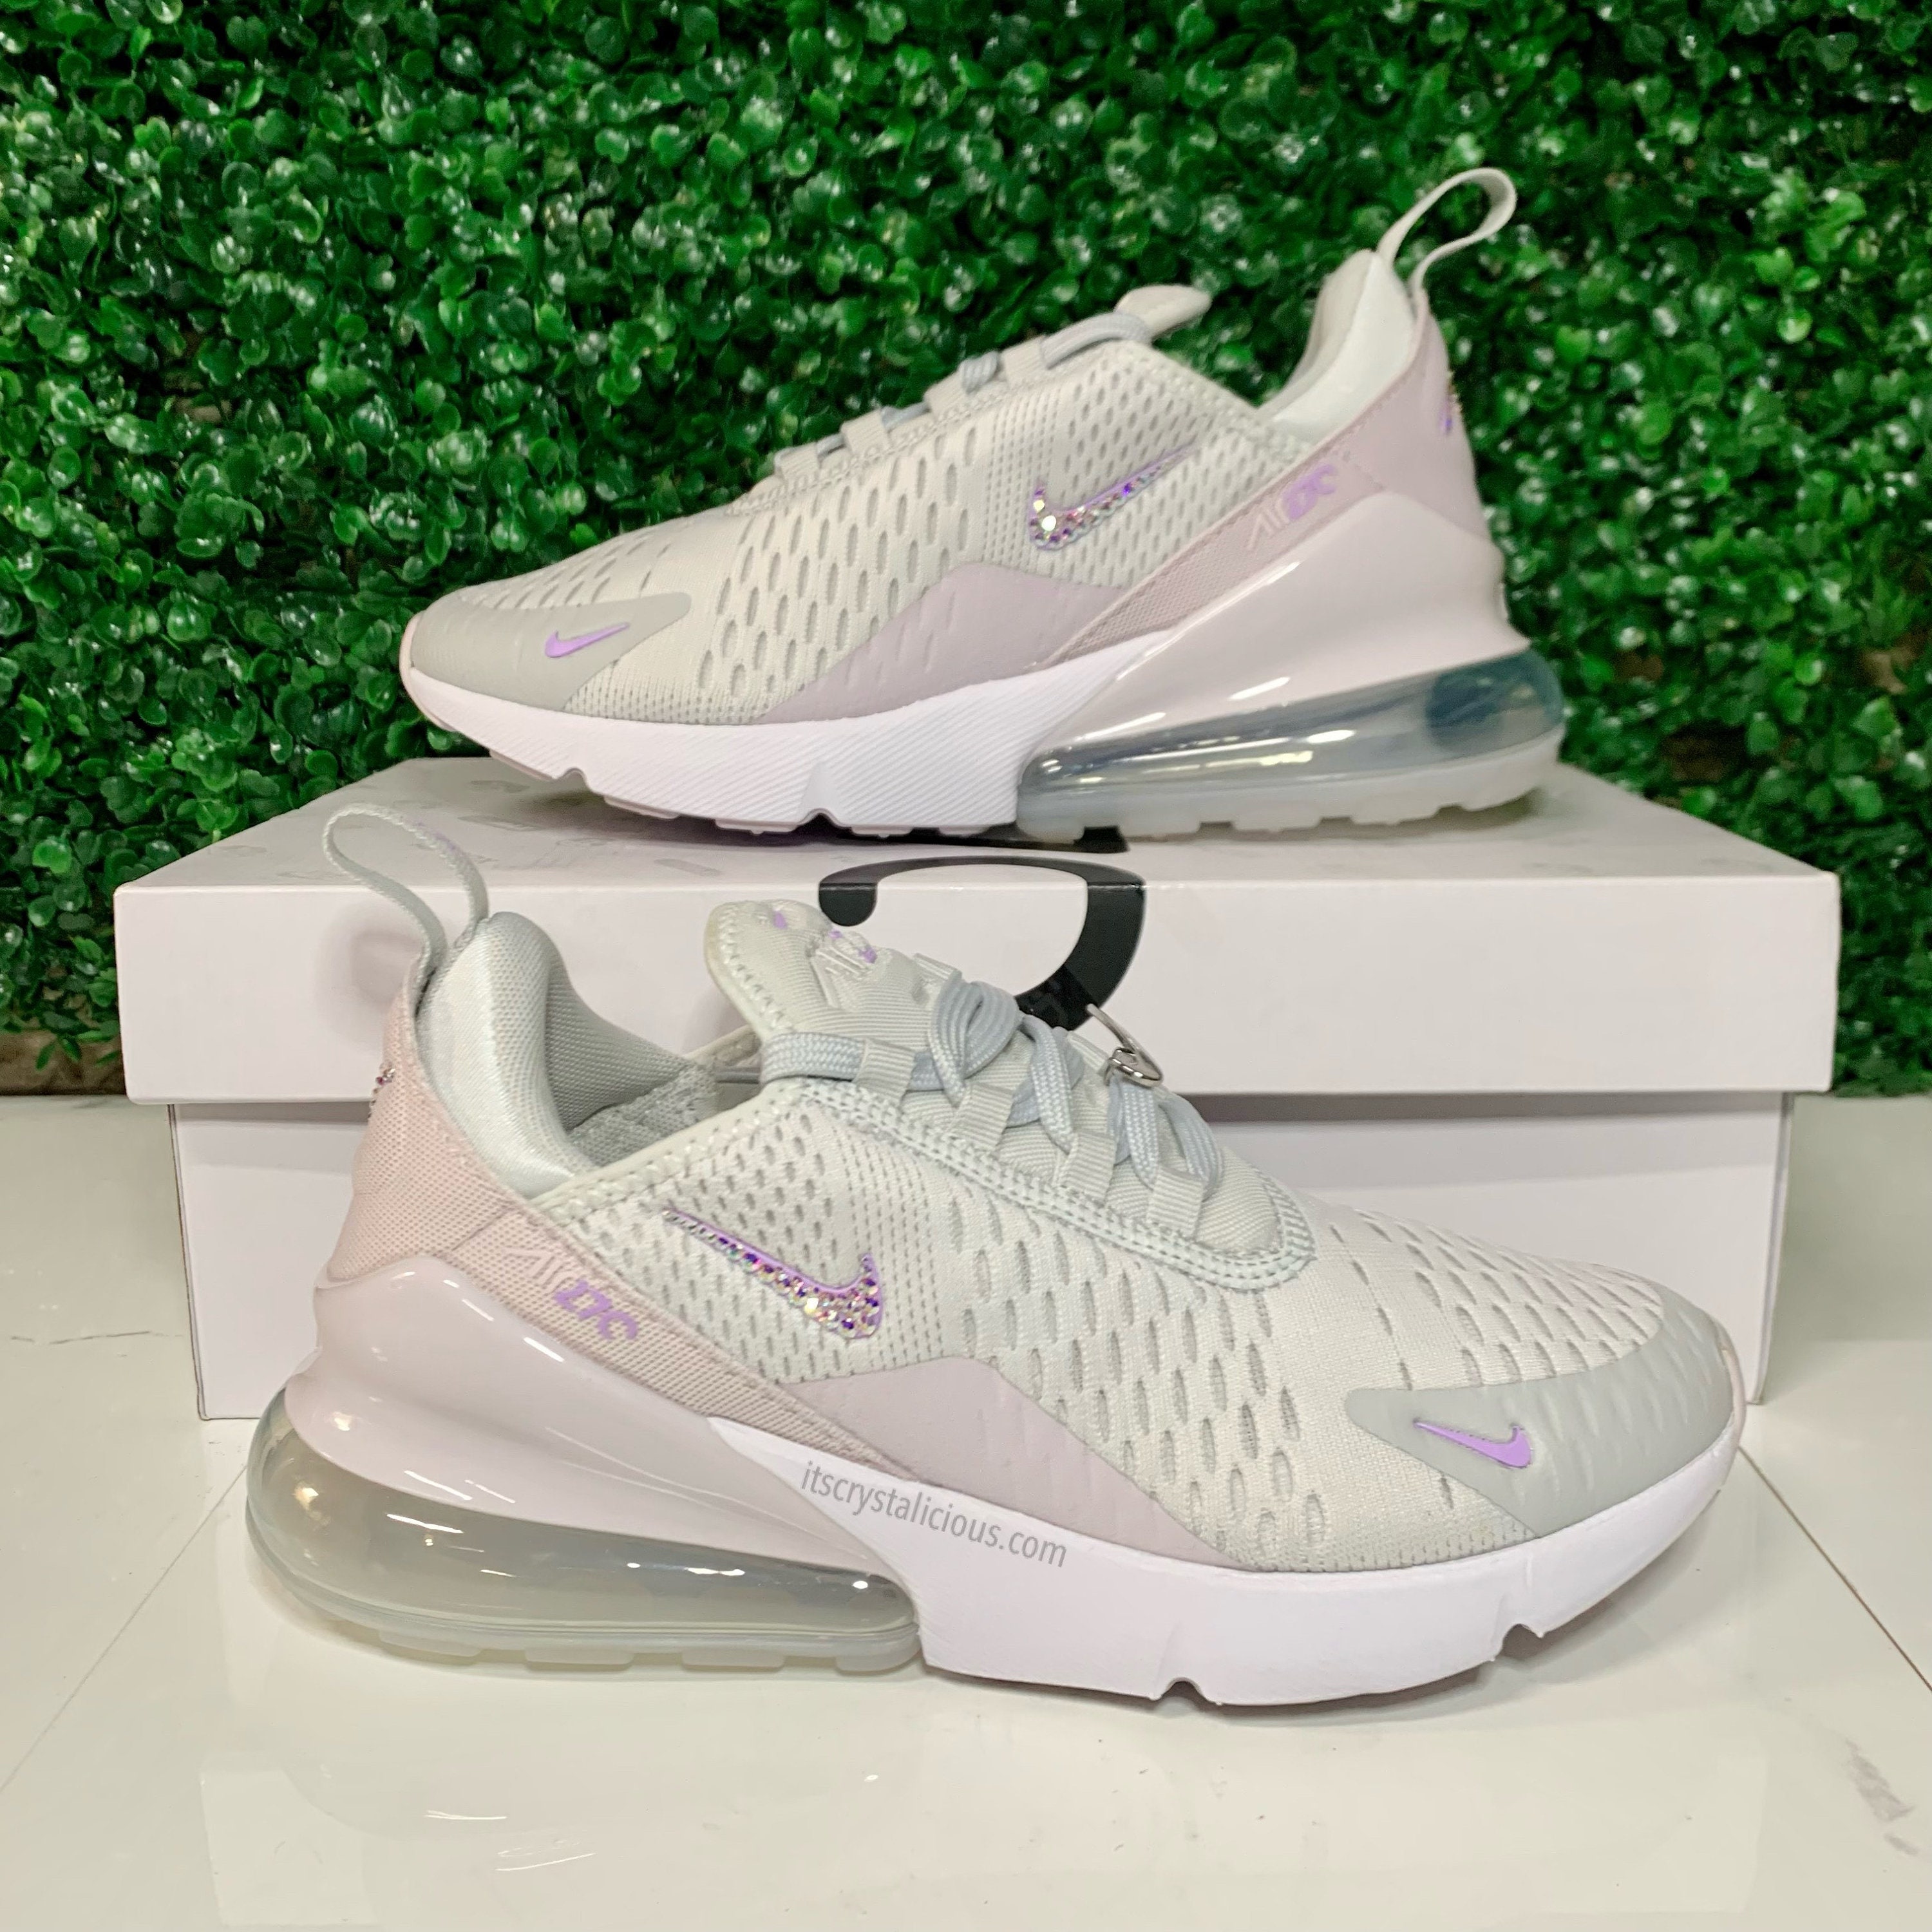 Crystal embellished Nike Air Max 270 Dust/Lilac | Etsy